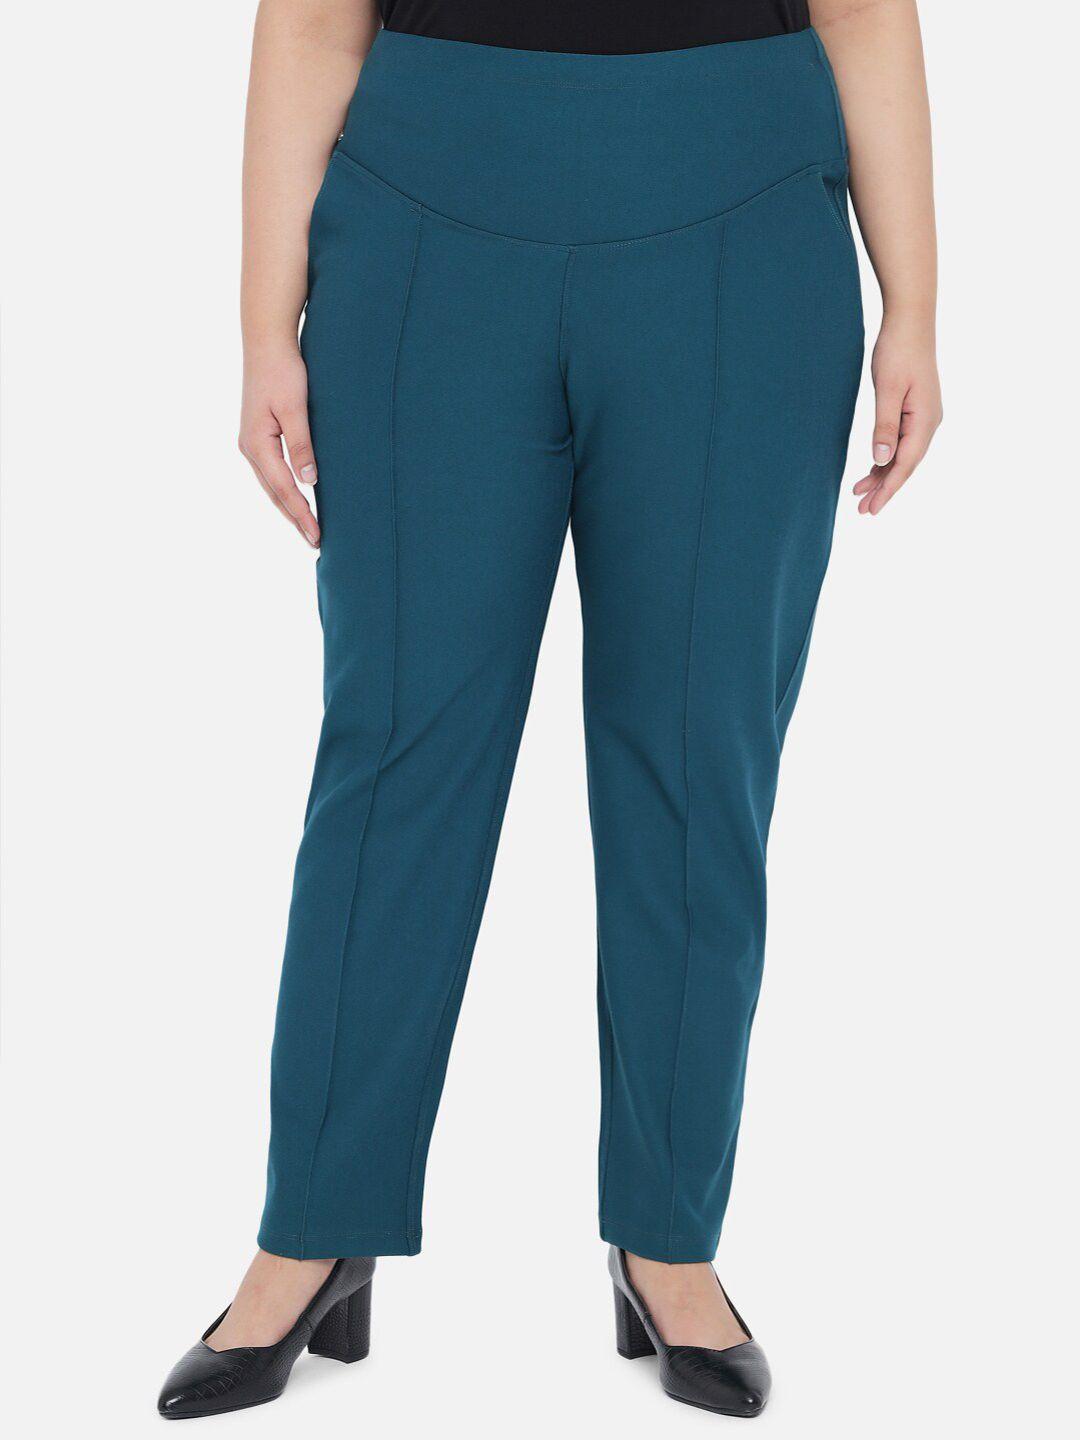 amydus-plus-size-women-teal-green-solid-jeggings